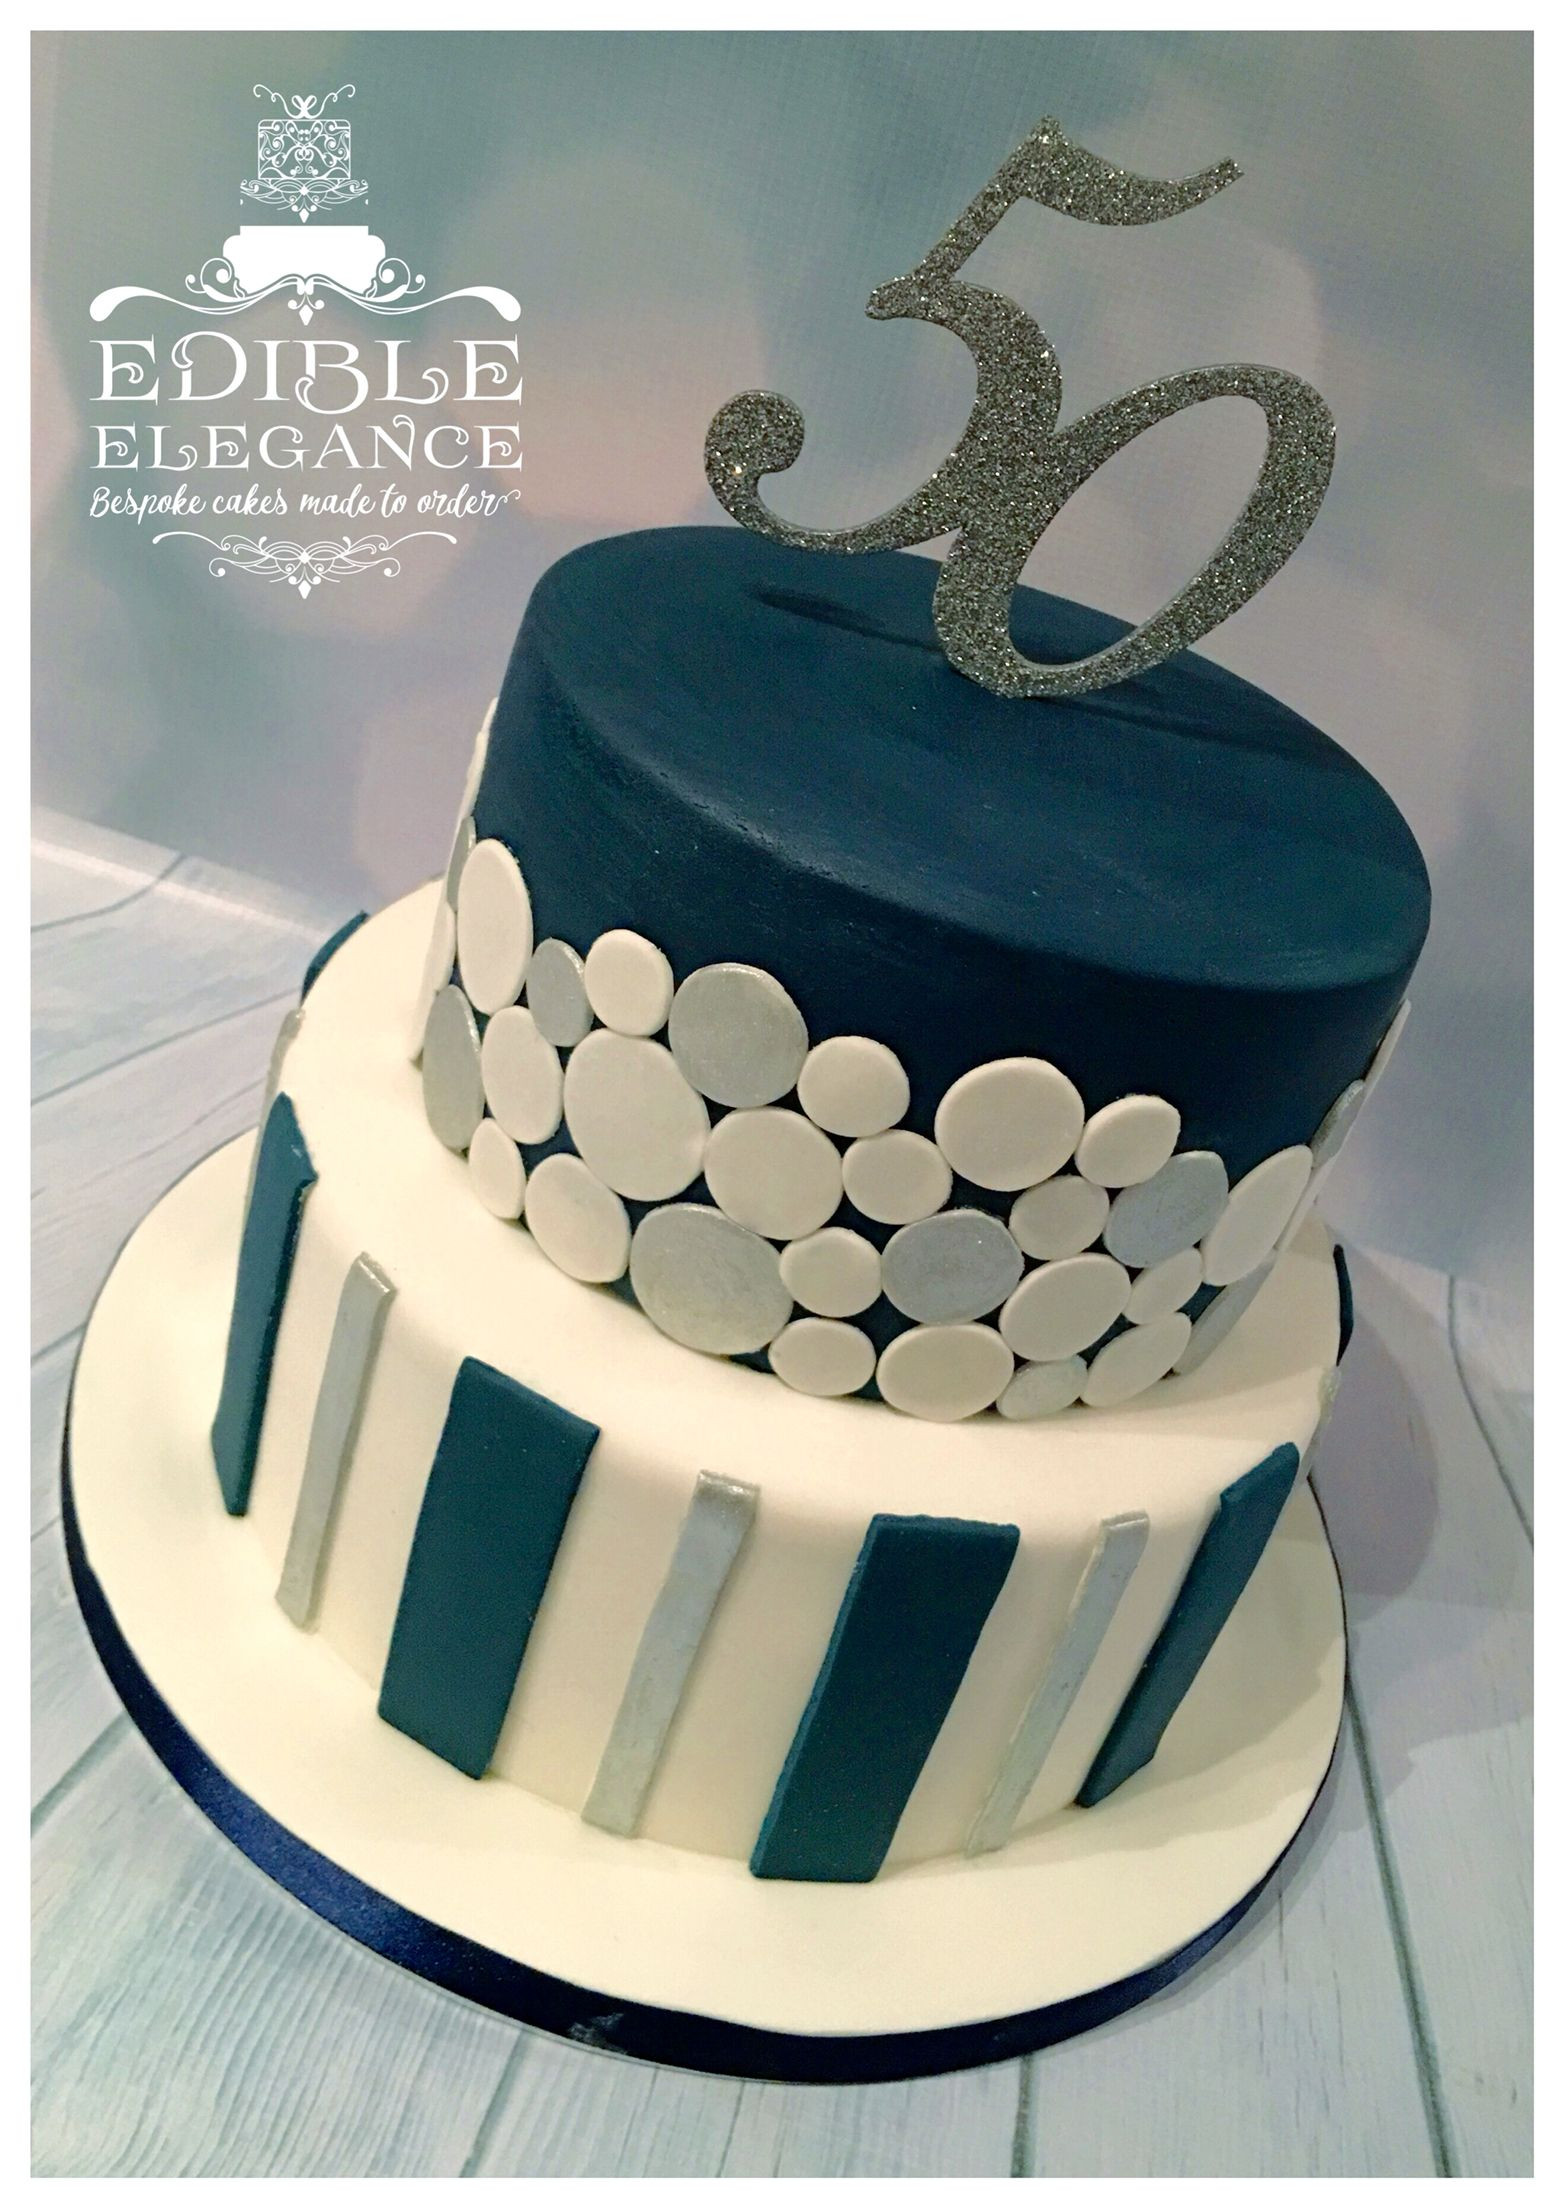 50th Birthday Cakes For Men
 50th birthday cake contemporary design in masculine blue